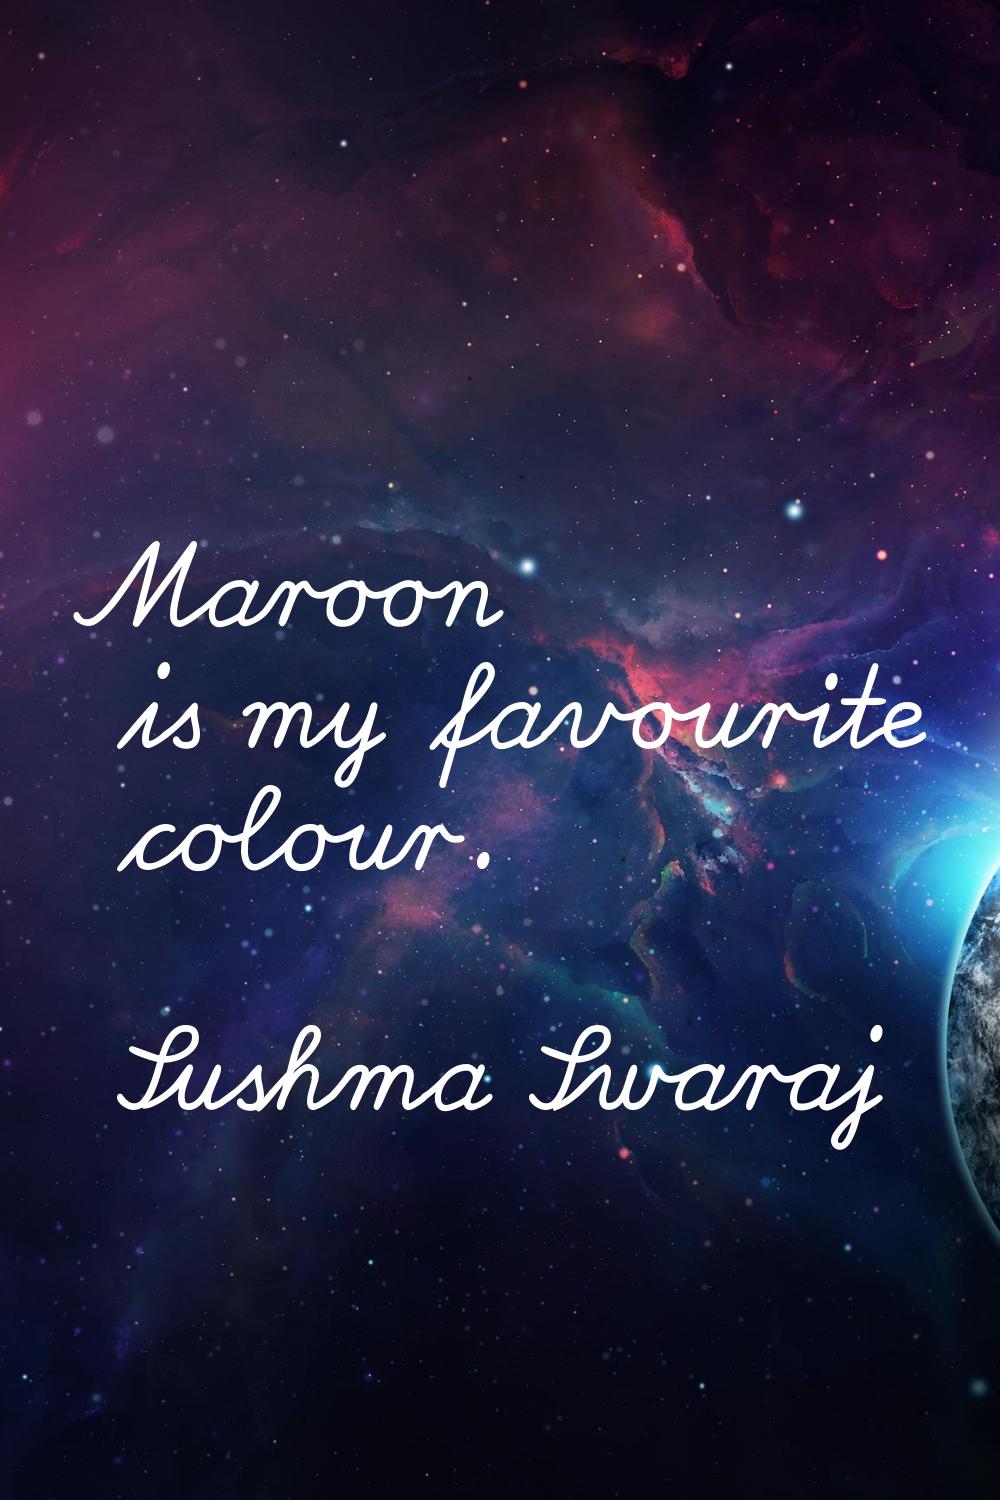 Maroon is my favourite colour.